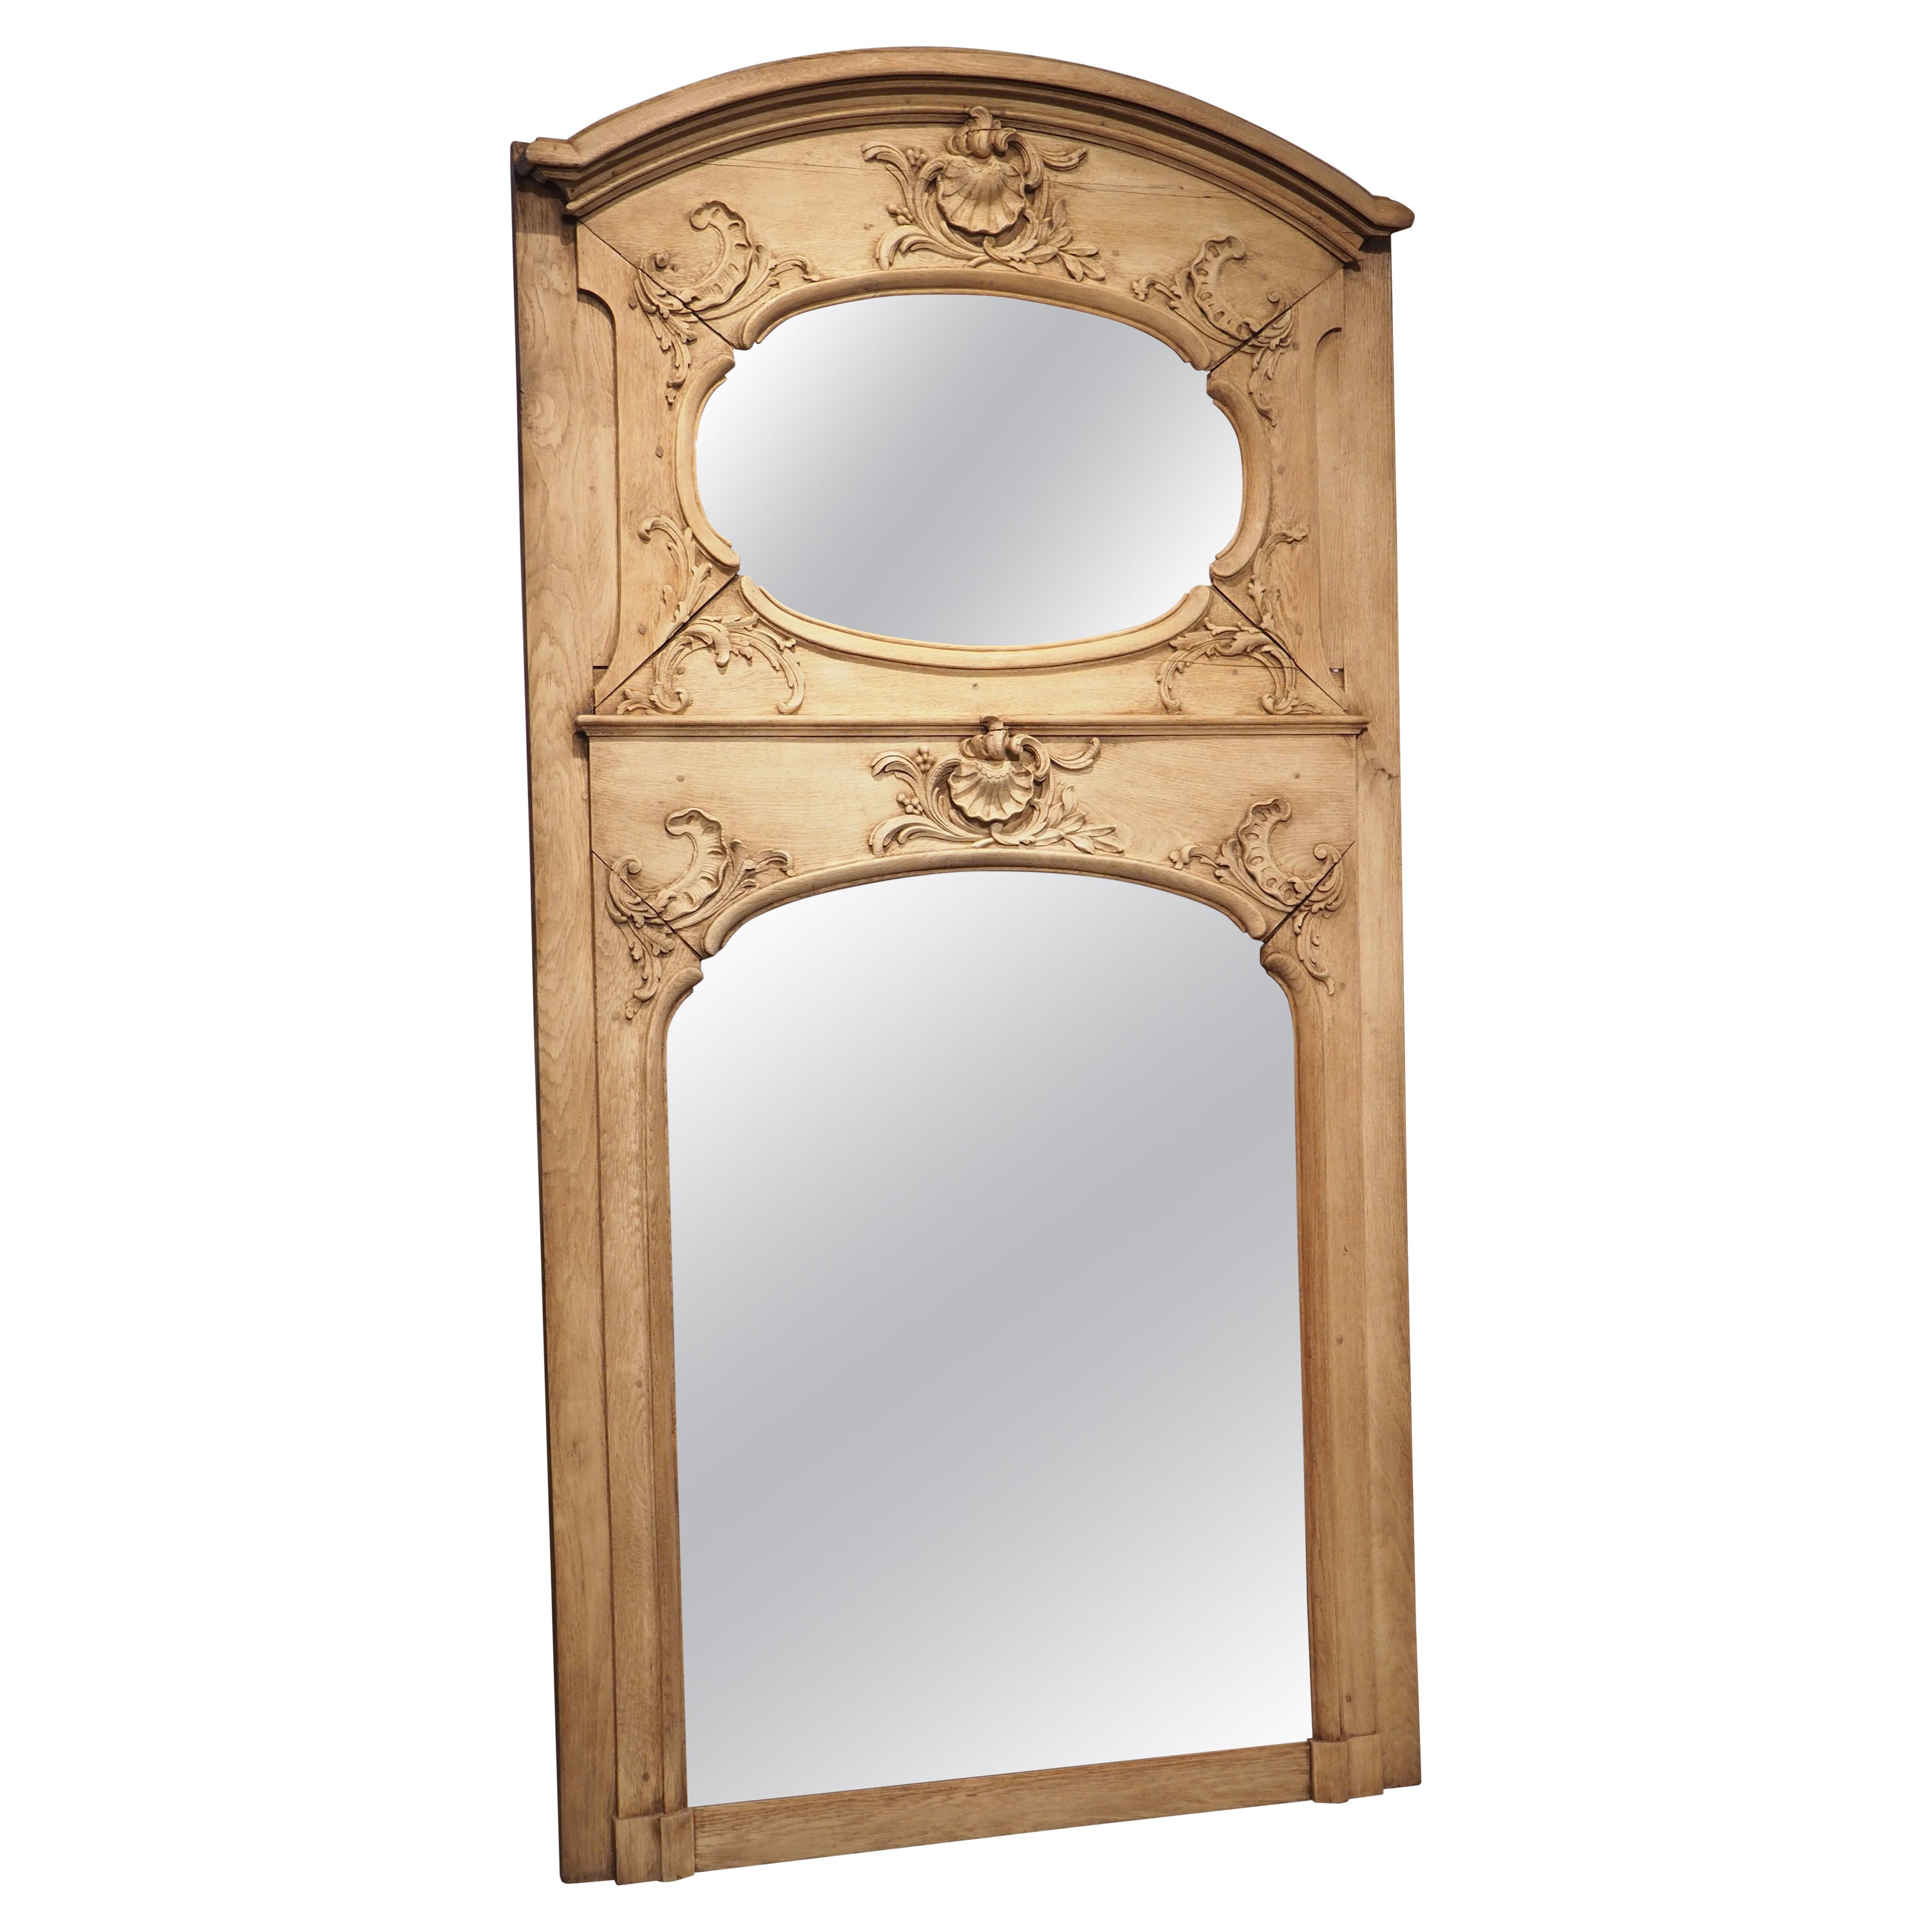 19th Century French Regence Style Bleached Oak Trumeau Mirror